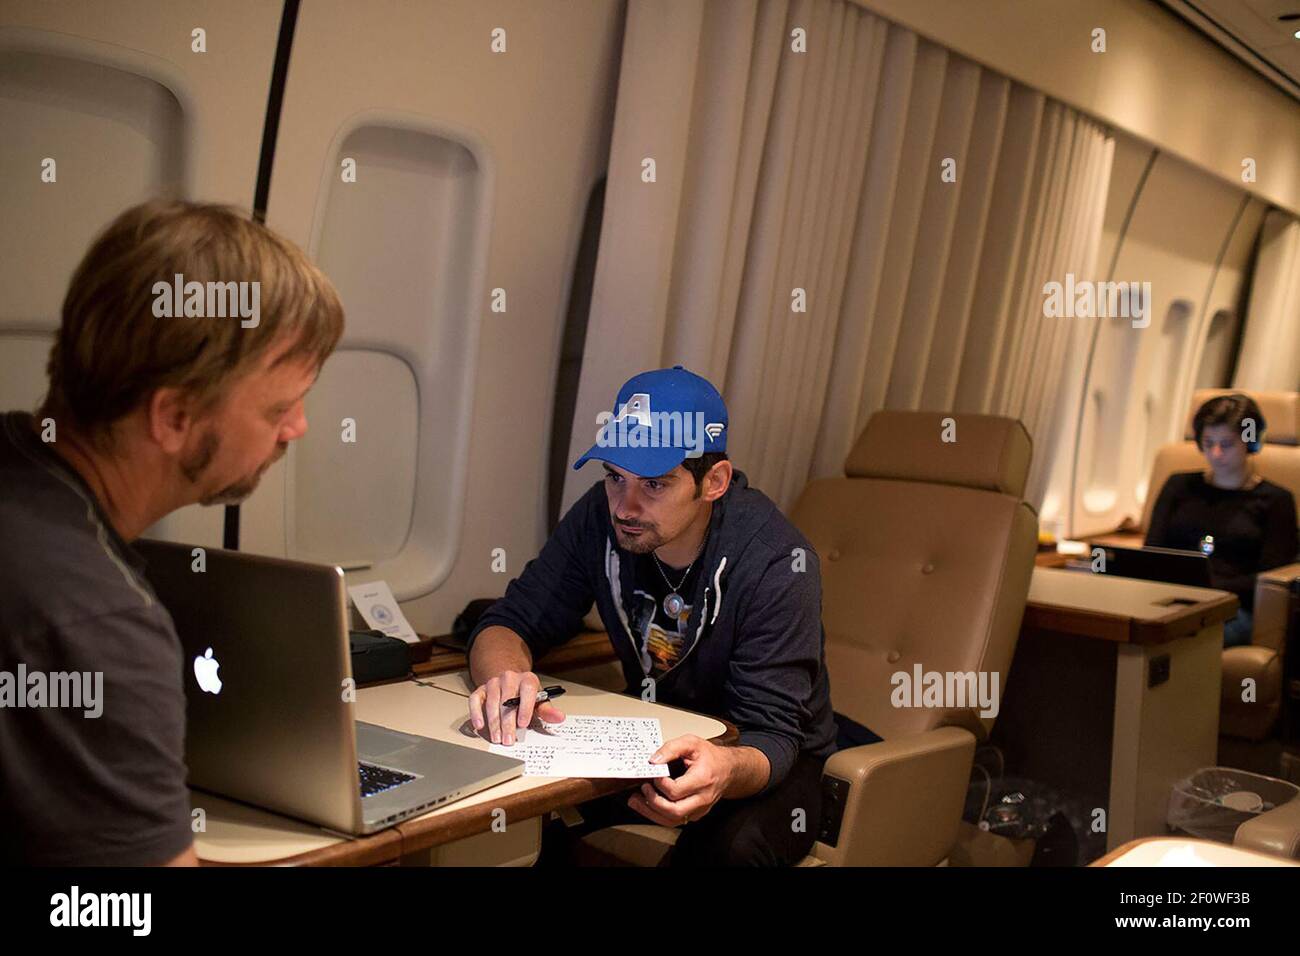 Country singer Brad Paisley works on his setlist with Kendal Marcy, left, aboard Air Force One en route to Bagram Airfield, Afghanistan with President Barack Obama to visit U.S. troops, Sunday, May 25, 2014 Stock Photo